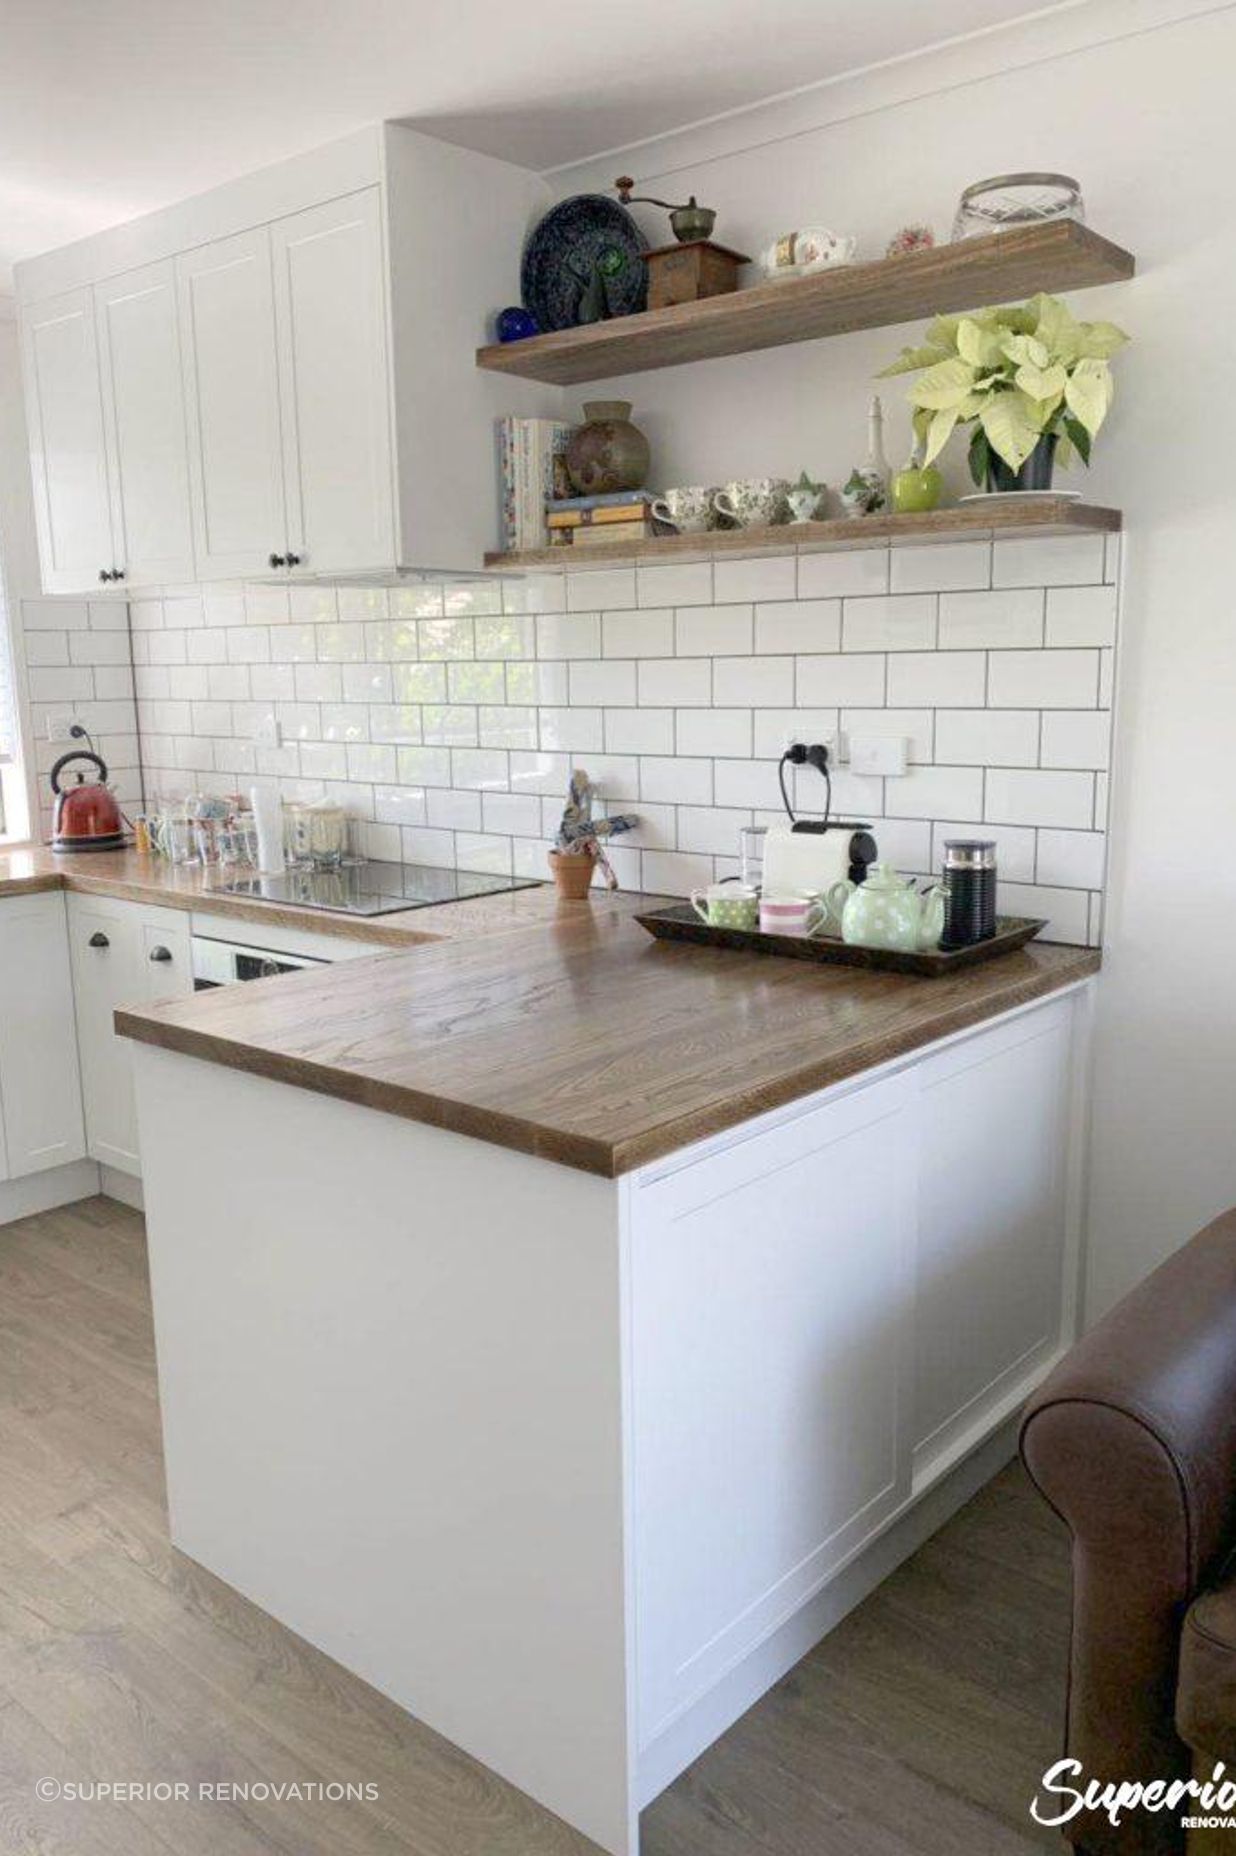 Full Kitchen renovation in Mangere Bridge – Floating shelves add a focal point as well as storage for the kitchen